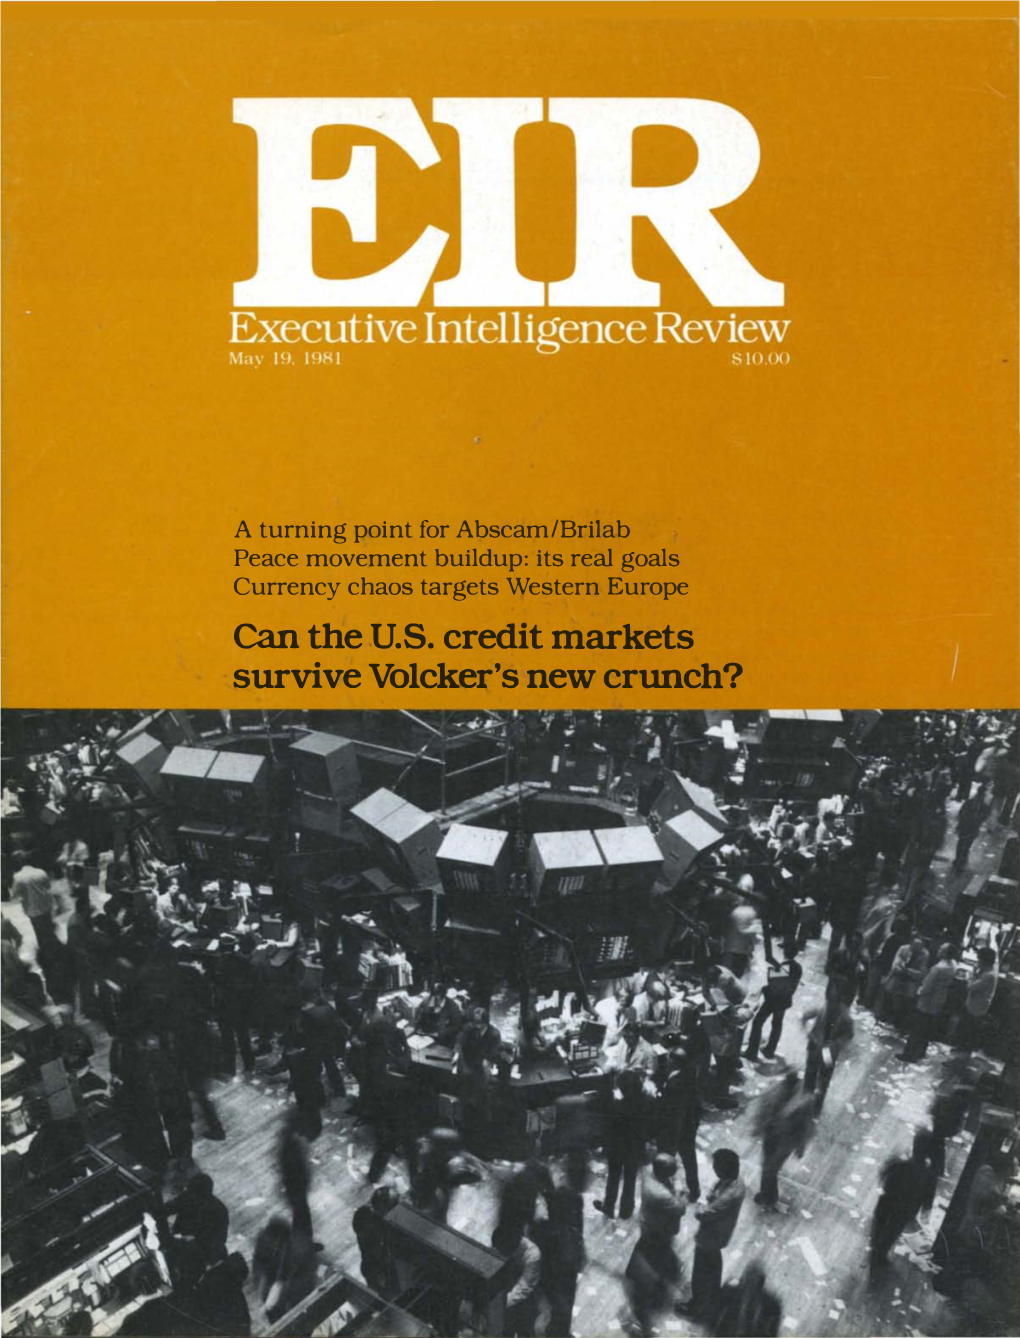 Executive Intelligence Review, Volume 8, Number 20, May 19, 1981